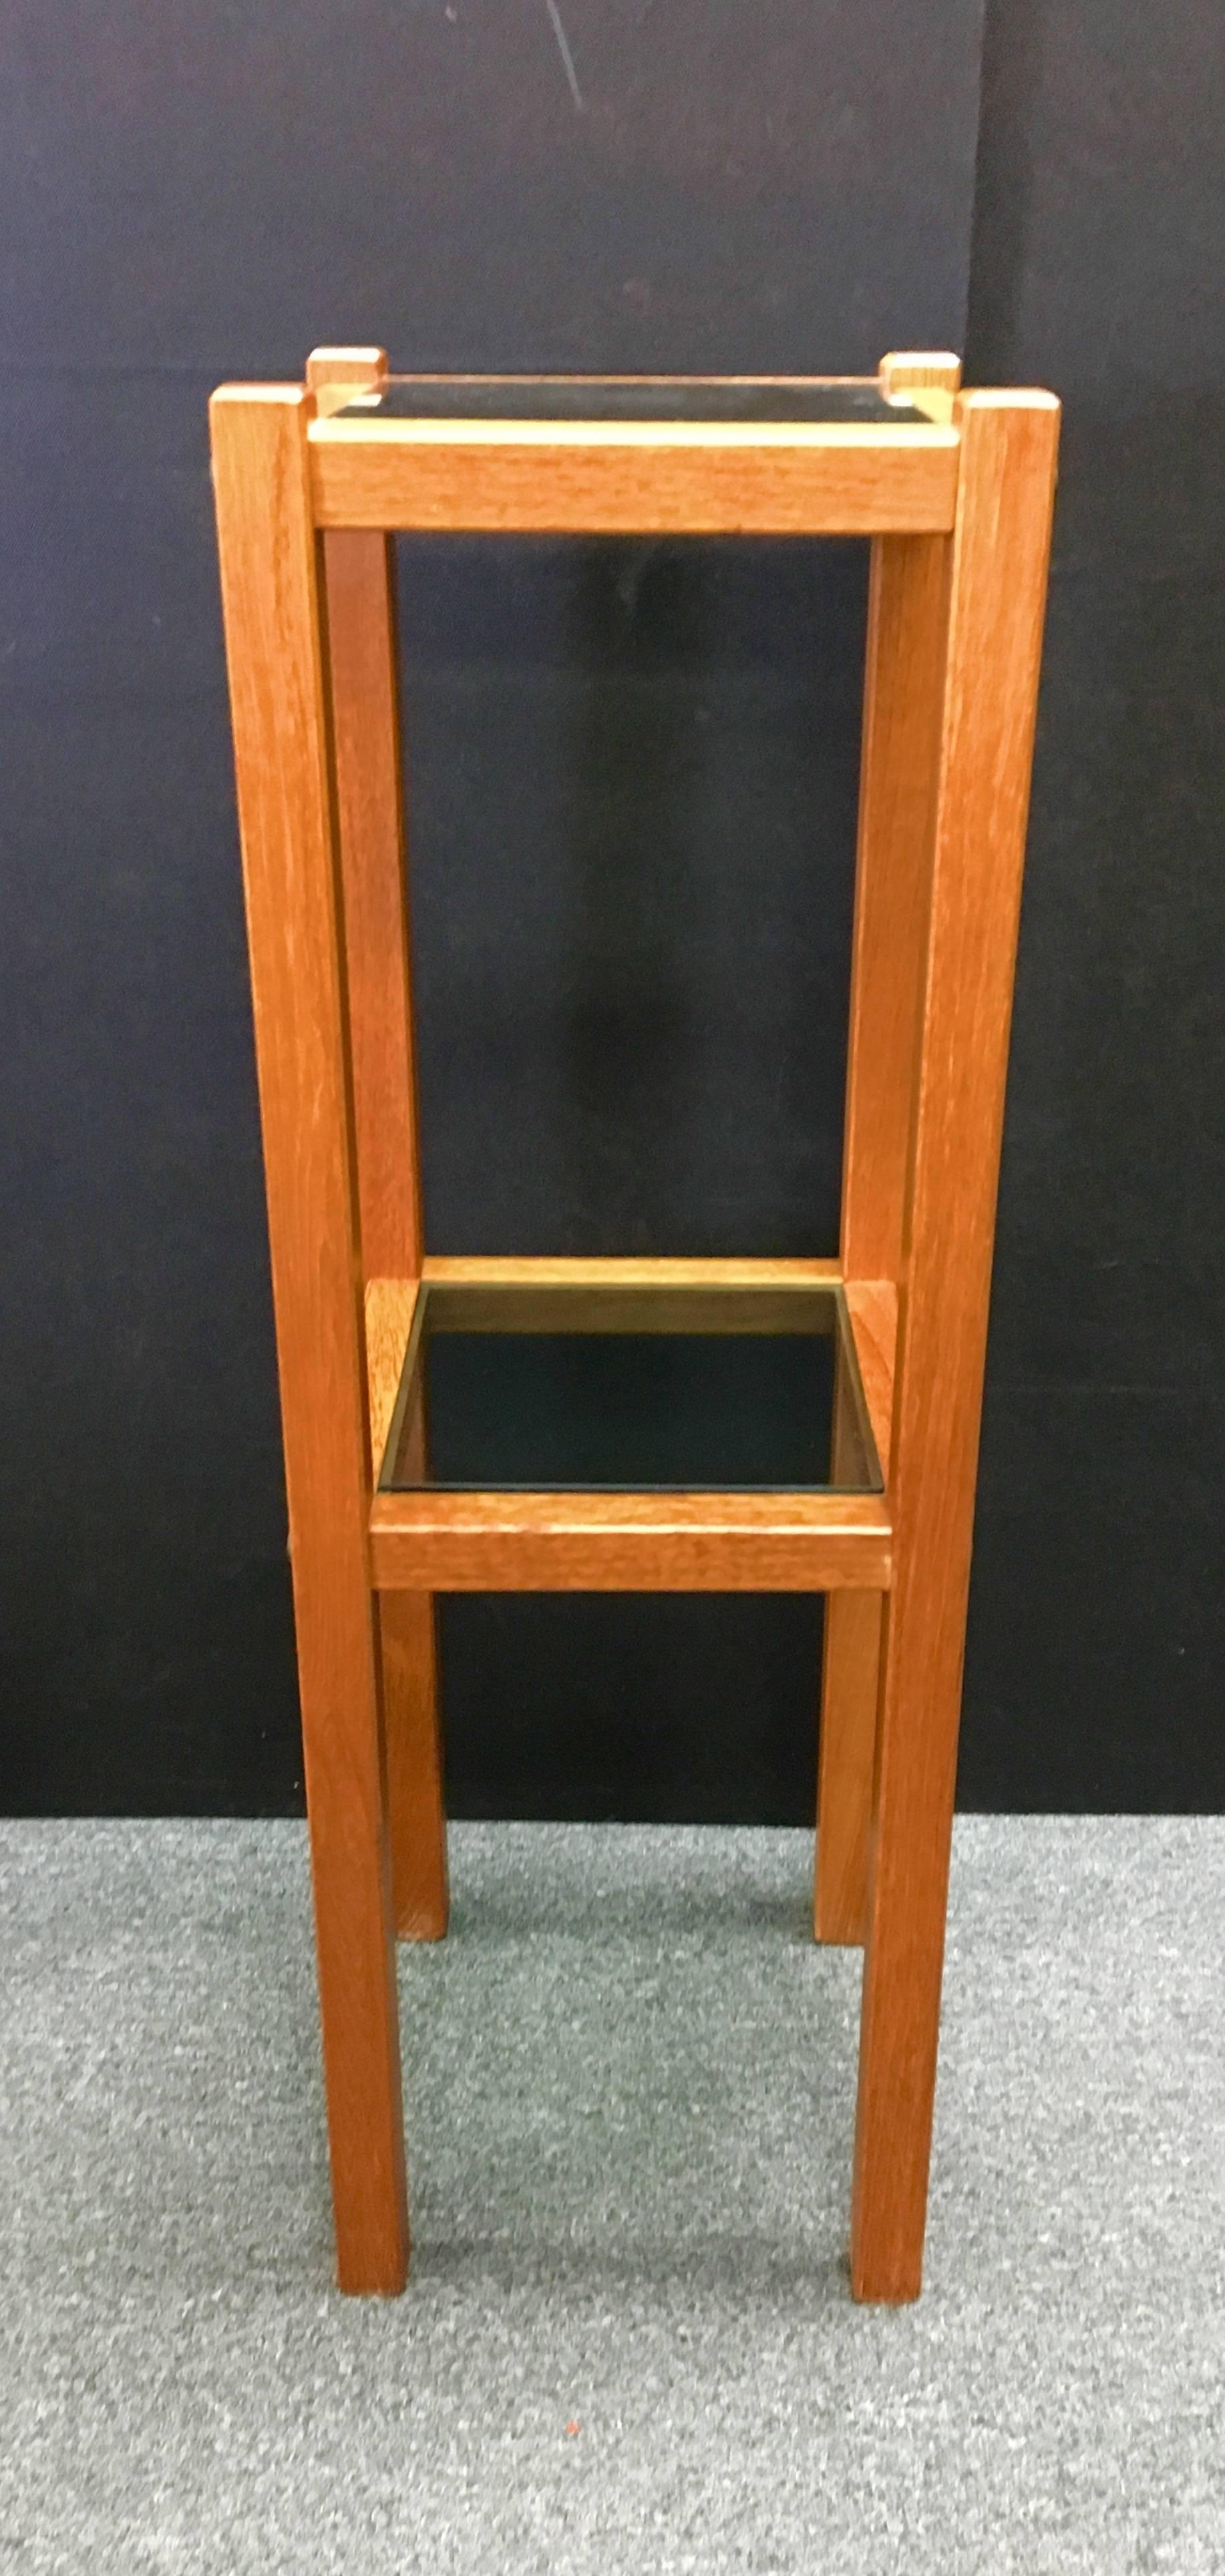 Very functional two shelf Danish modern teak plant stand. Shelves are smoked glass.